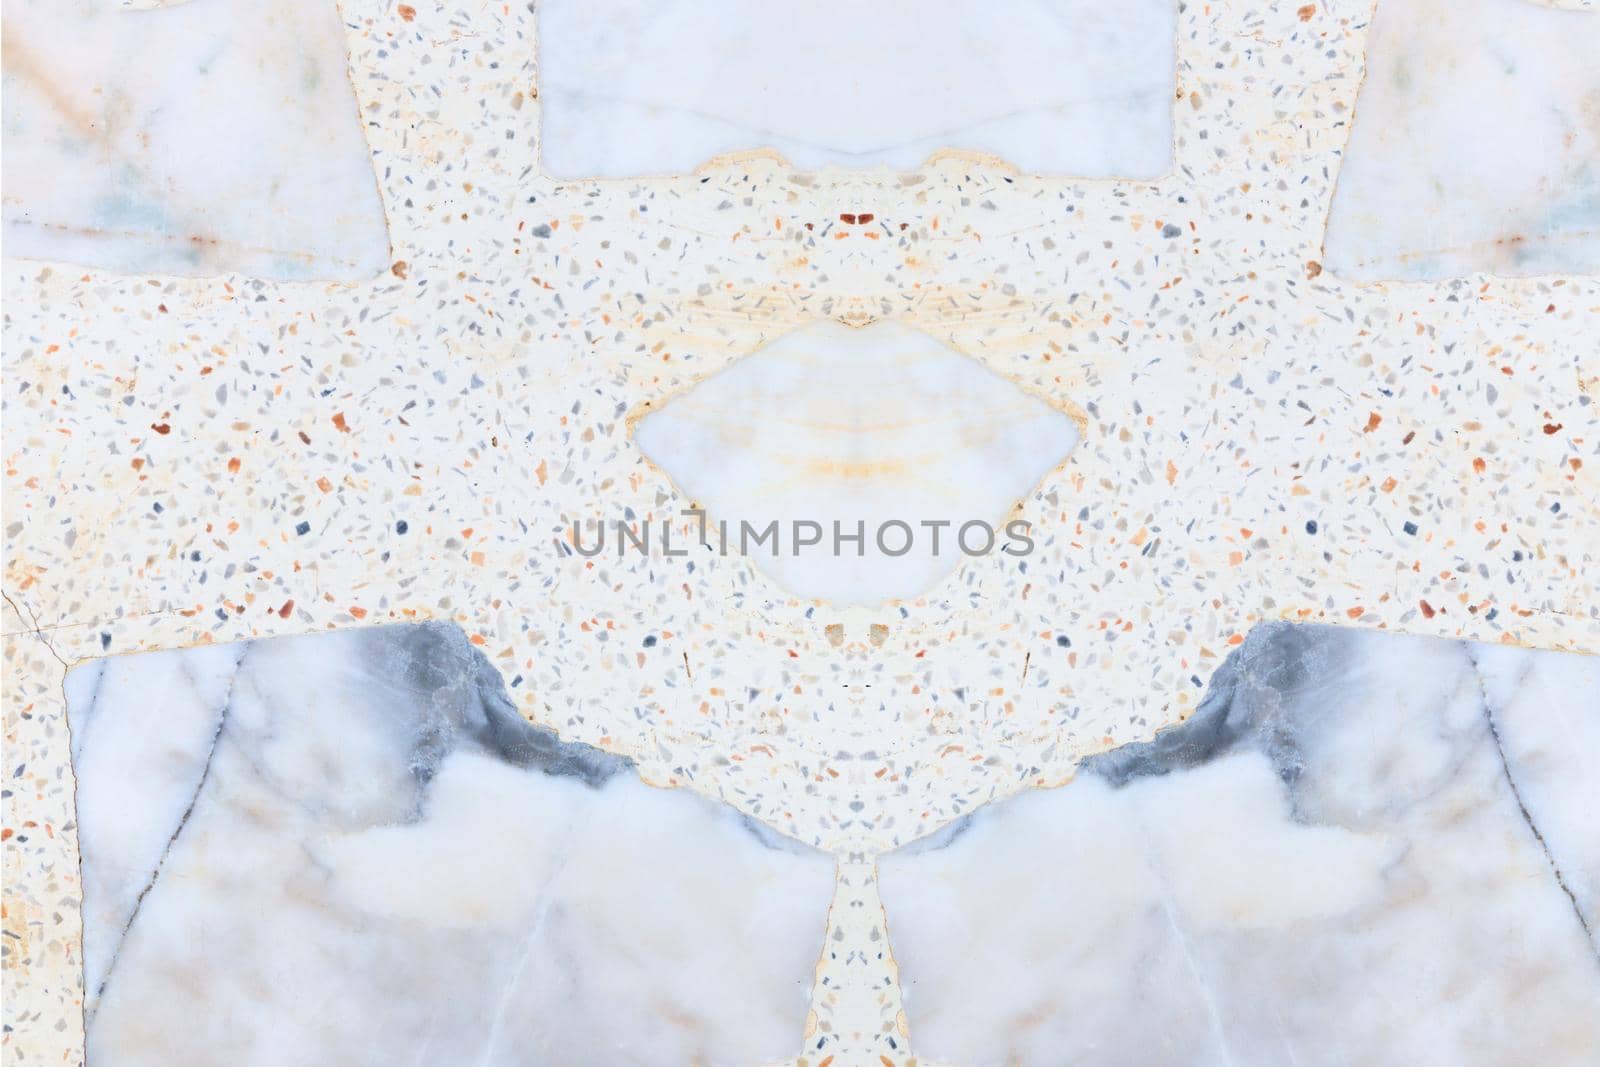 terrazzo flooring or polished stone pattern wall and color surface marble vintage texture old for background image horizontal by pramot